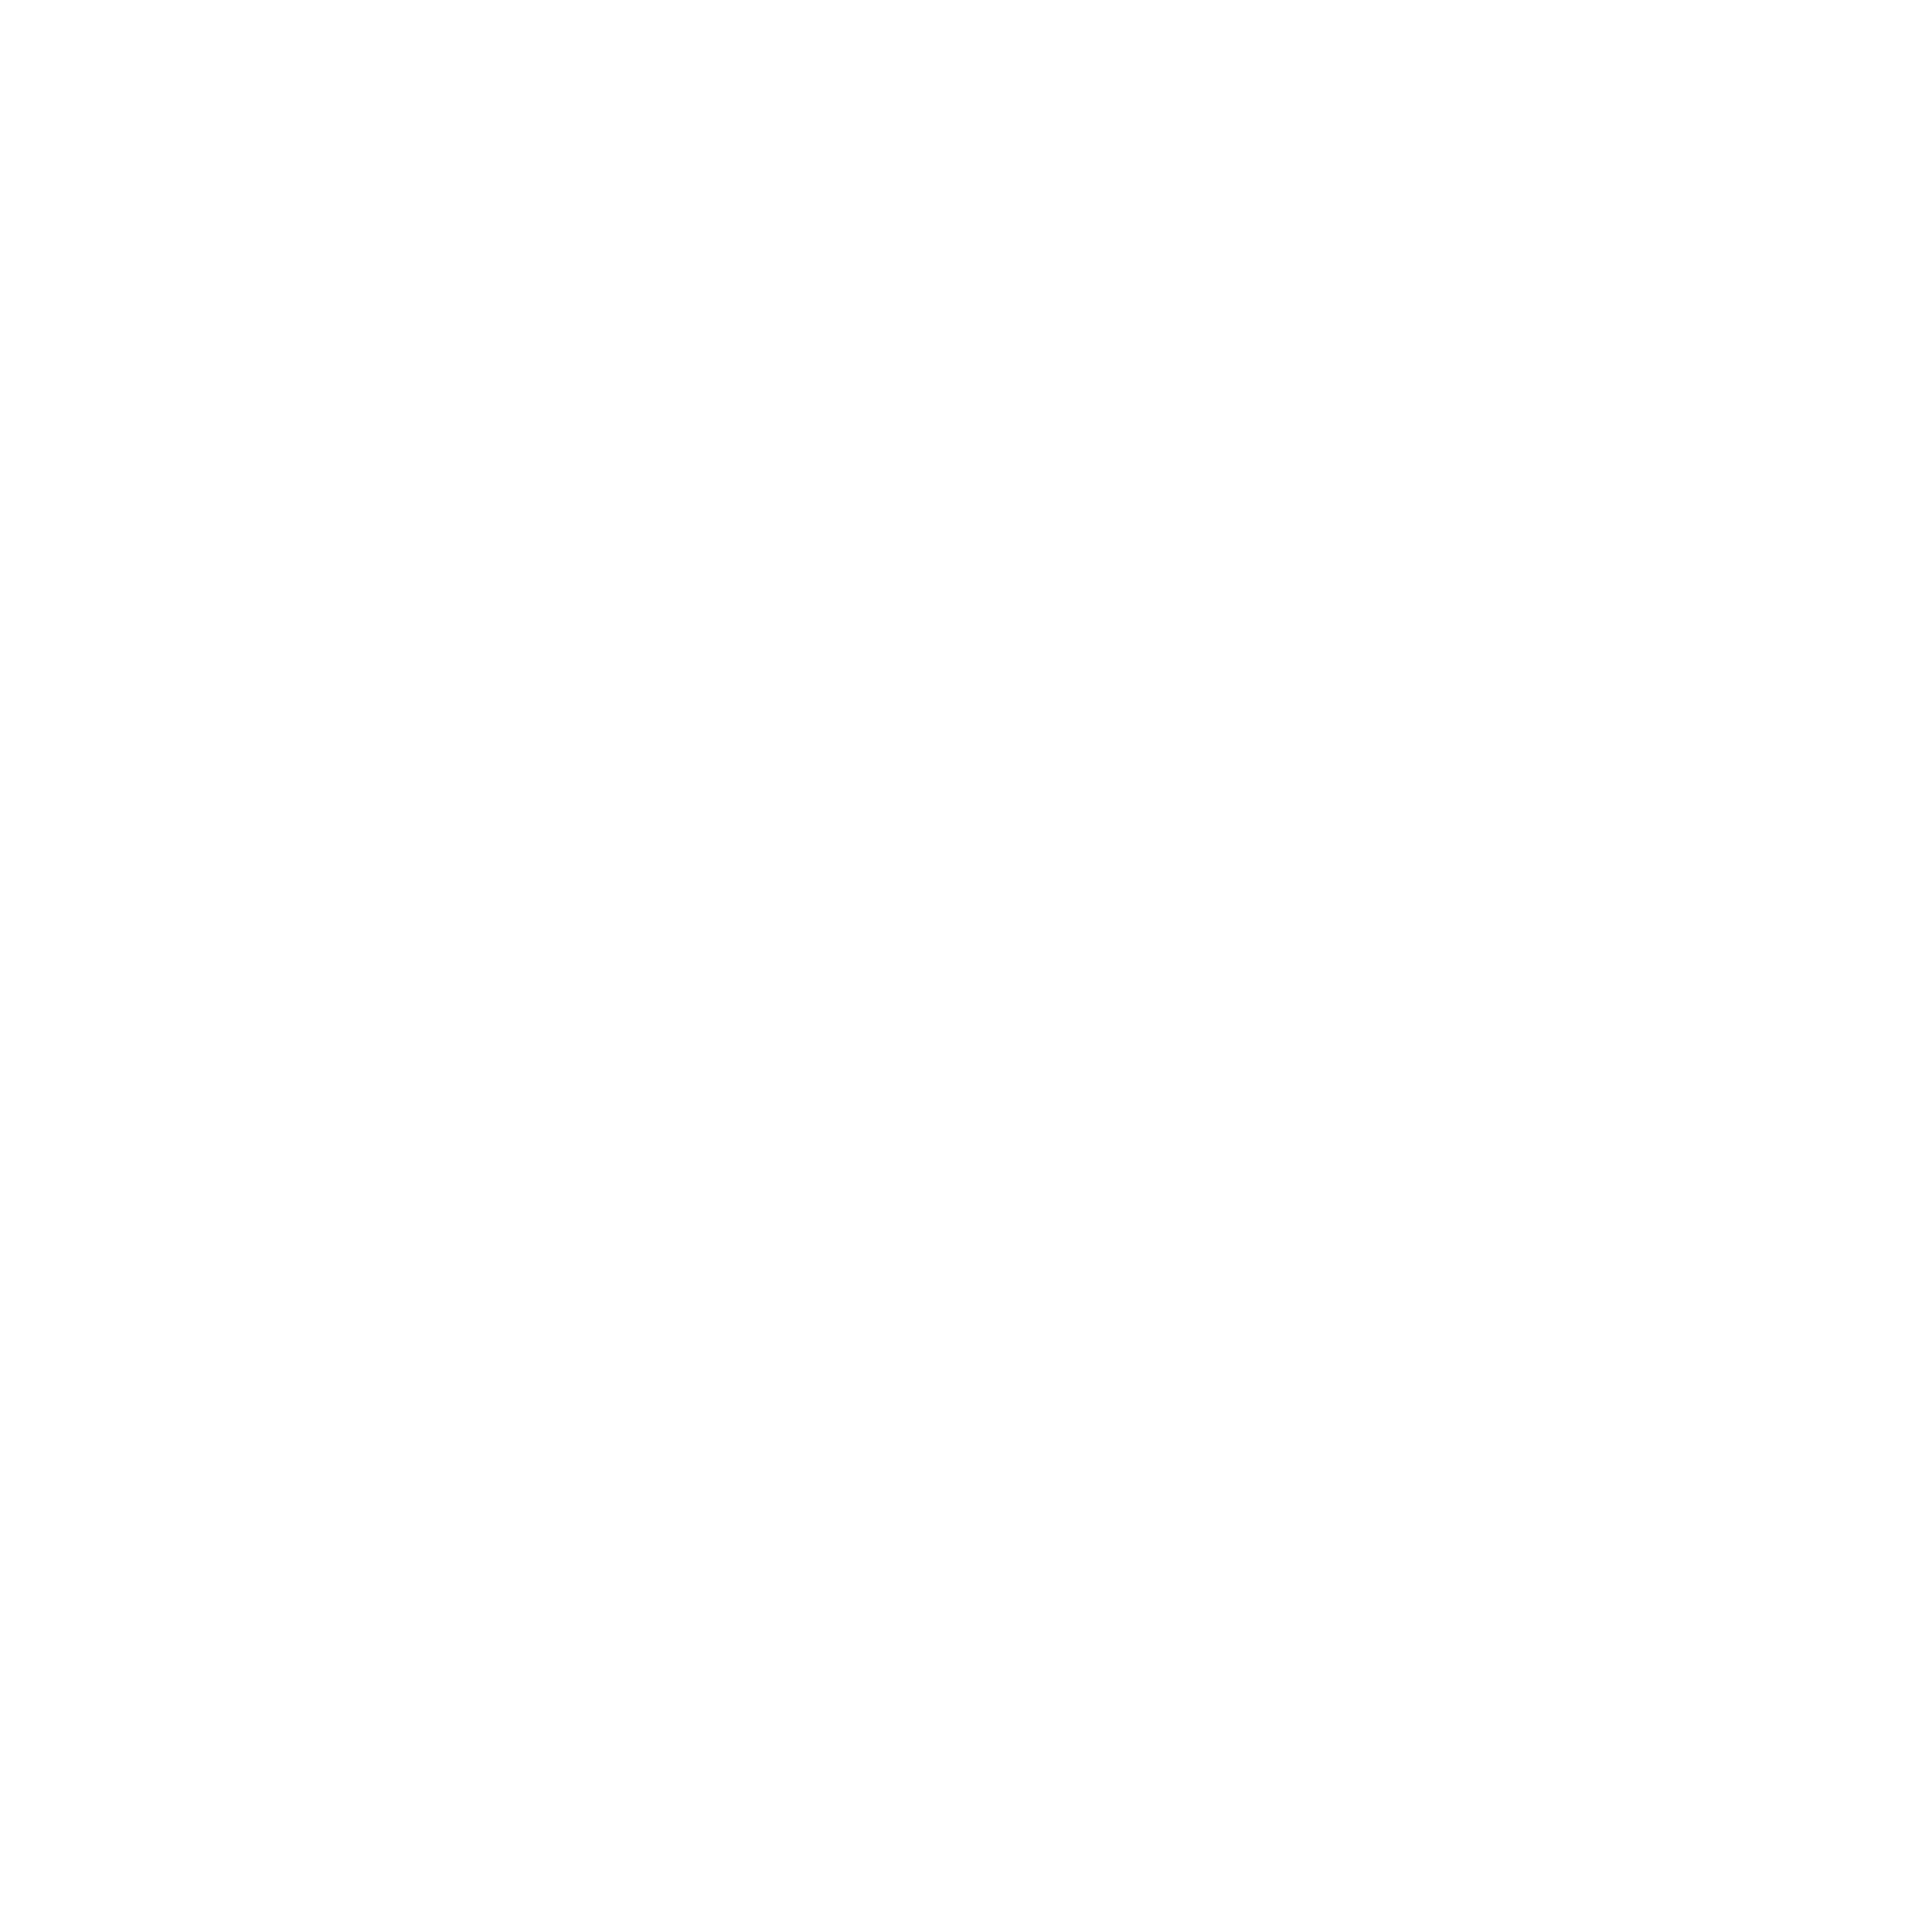 Susan Chase Group